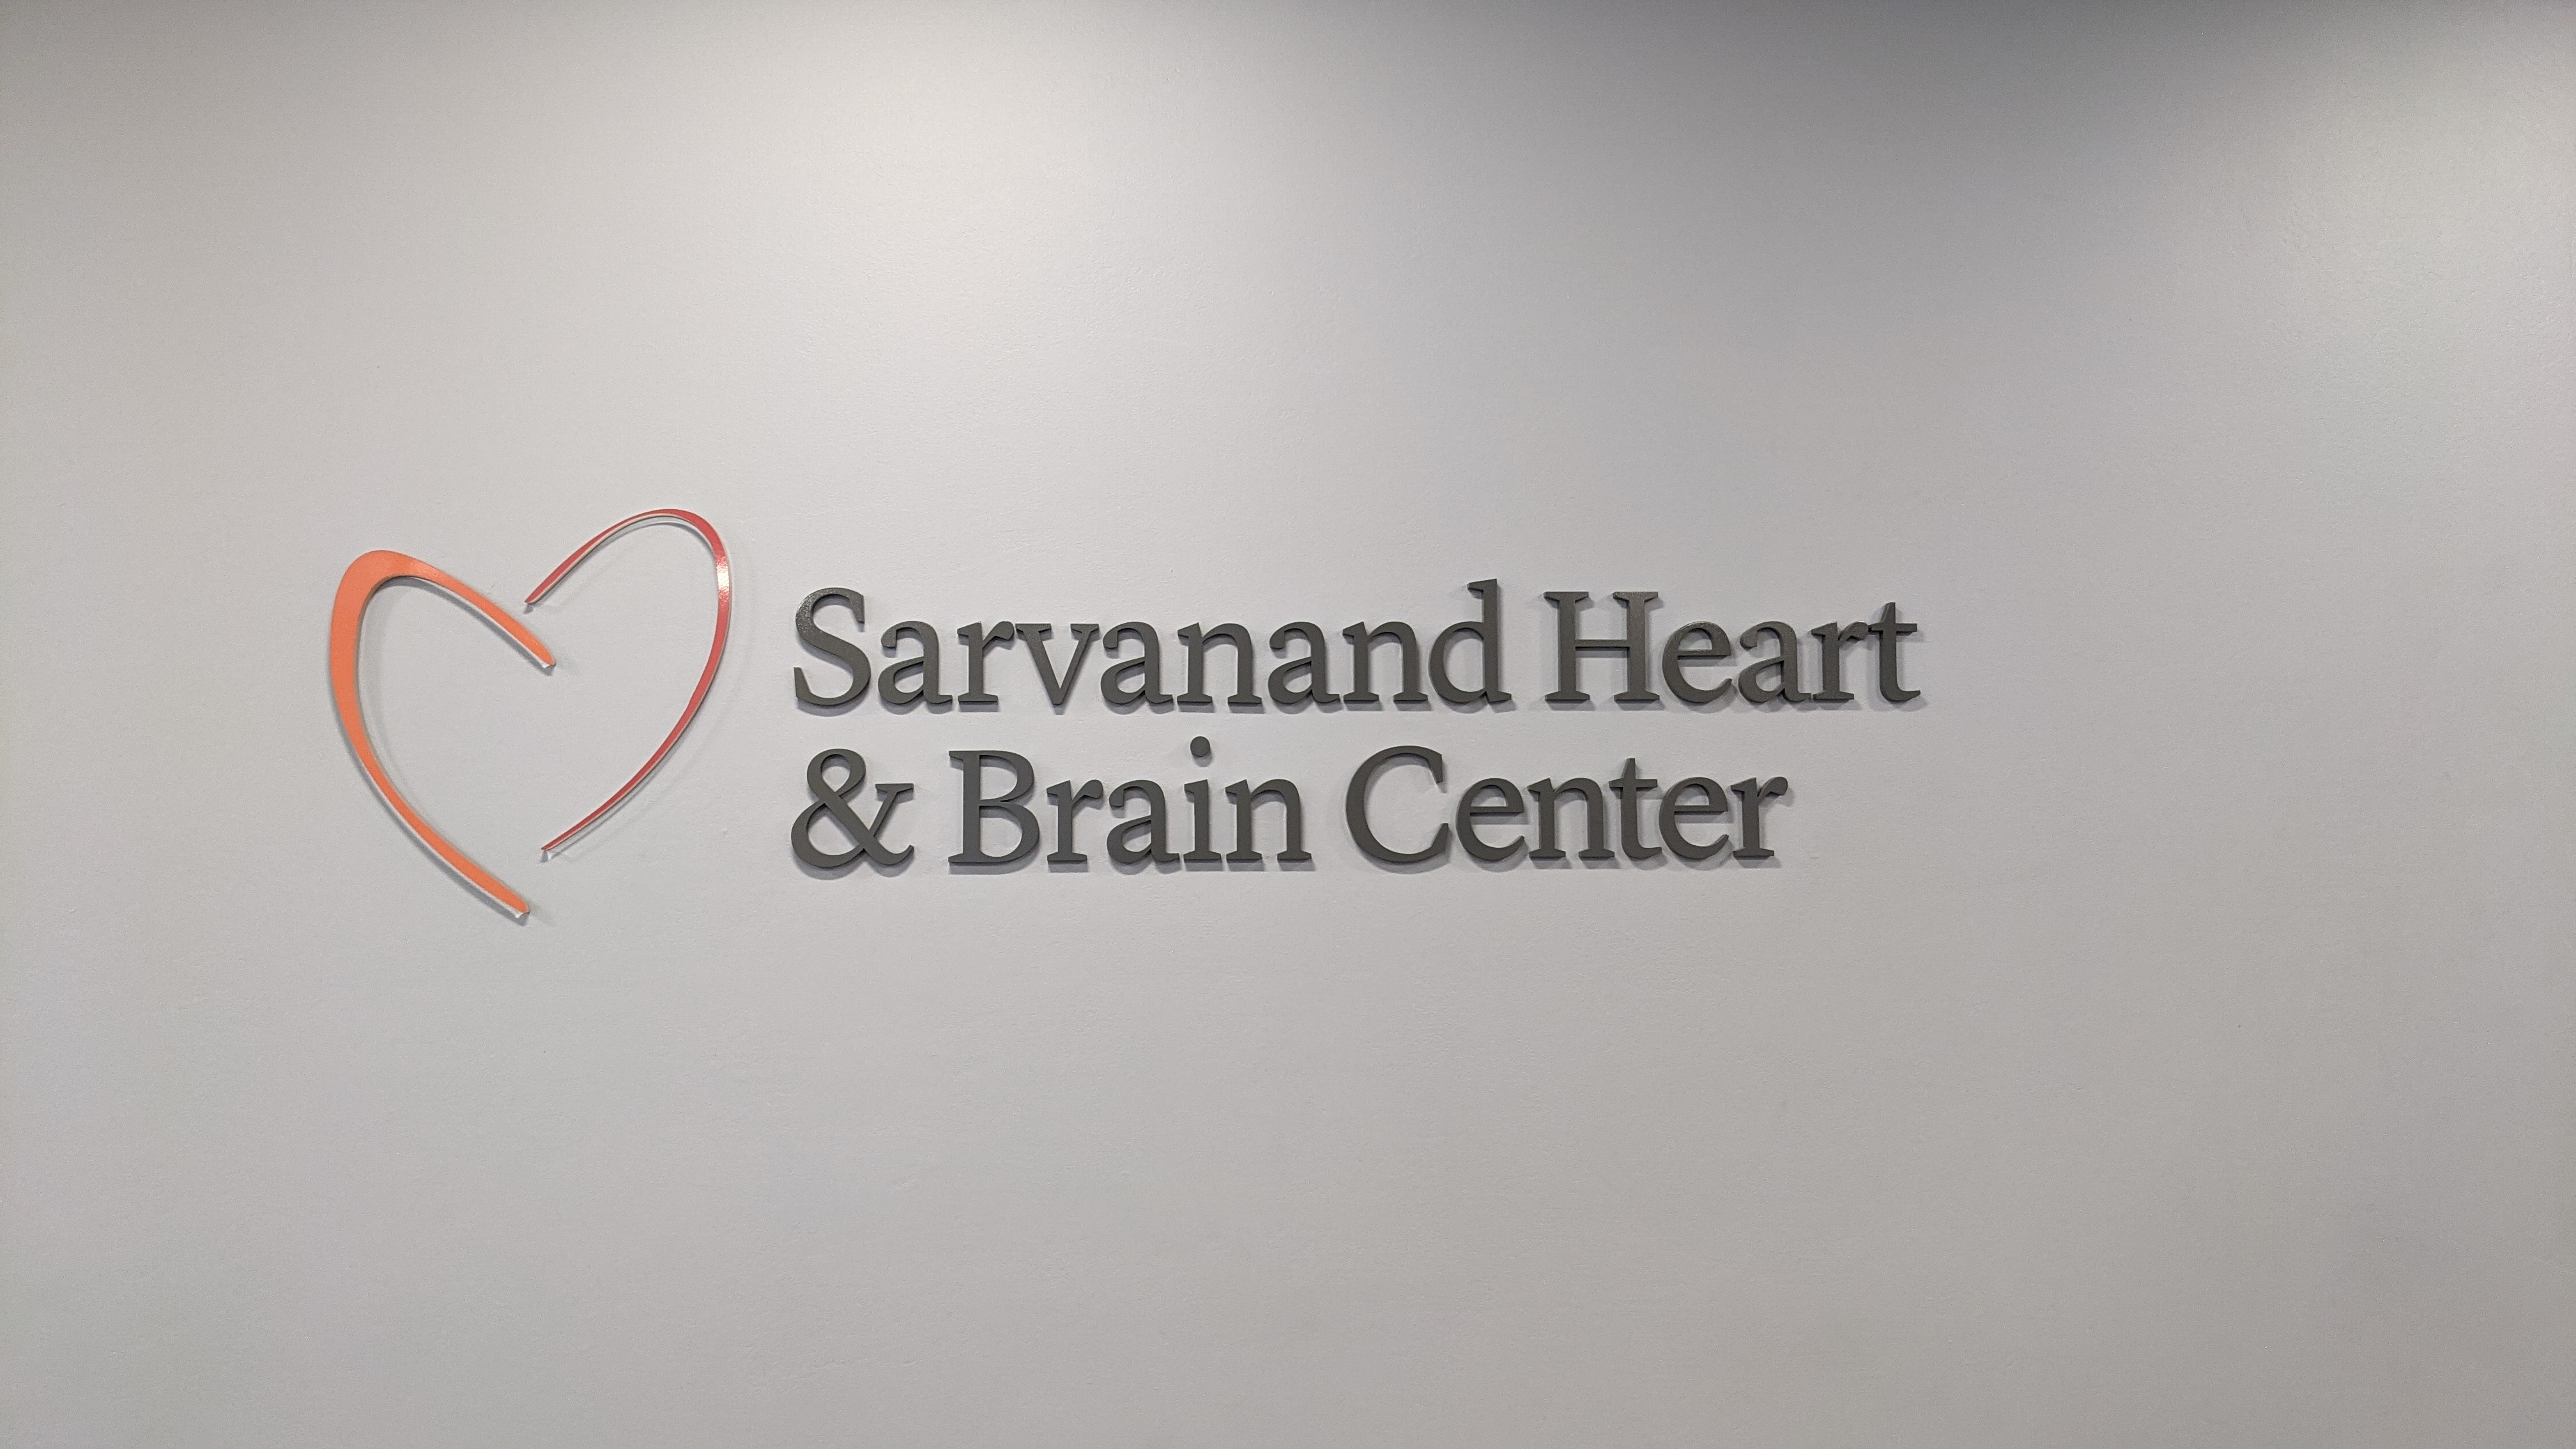 The Sarvanand Heart and Brain Center at Memorial Hospital Recertified as Central Valley’s Only Thrombectomy Capable Stroke Center  